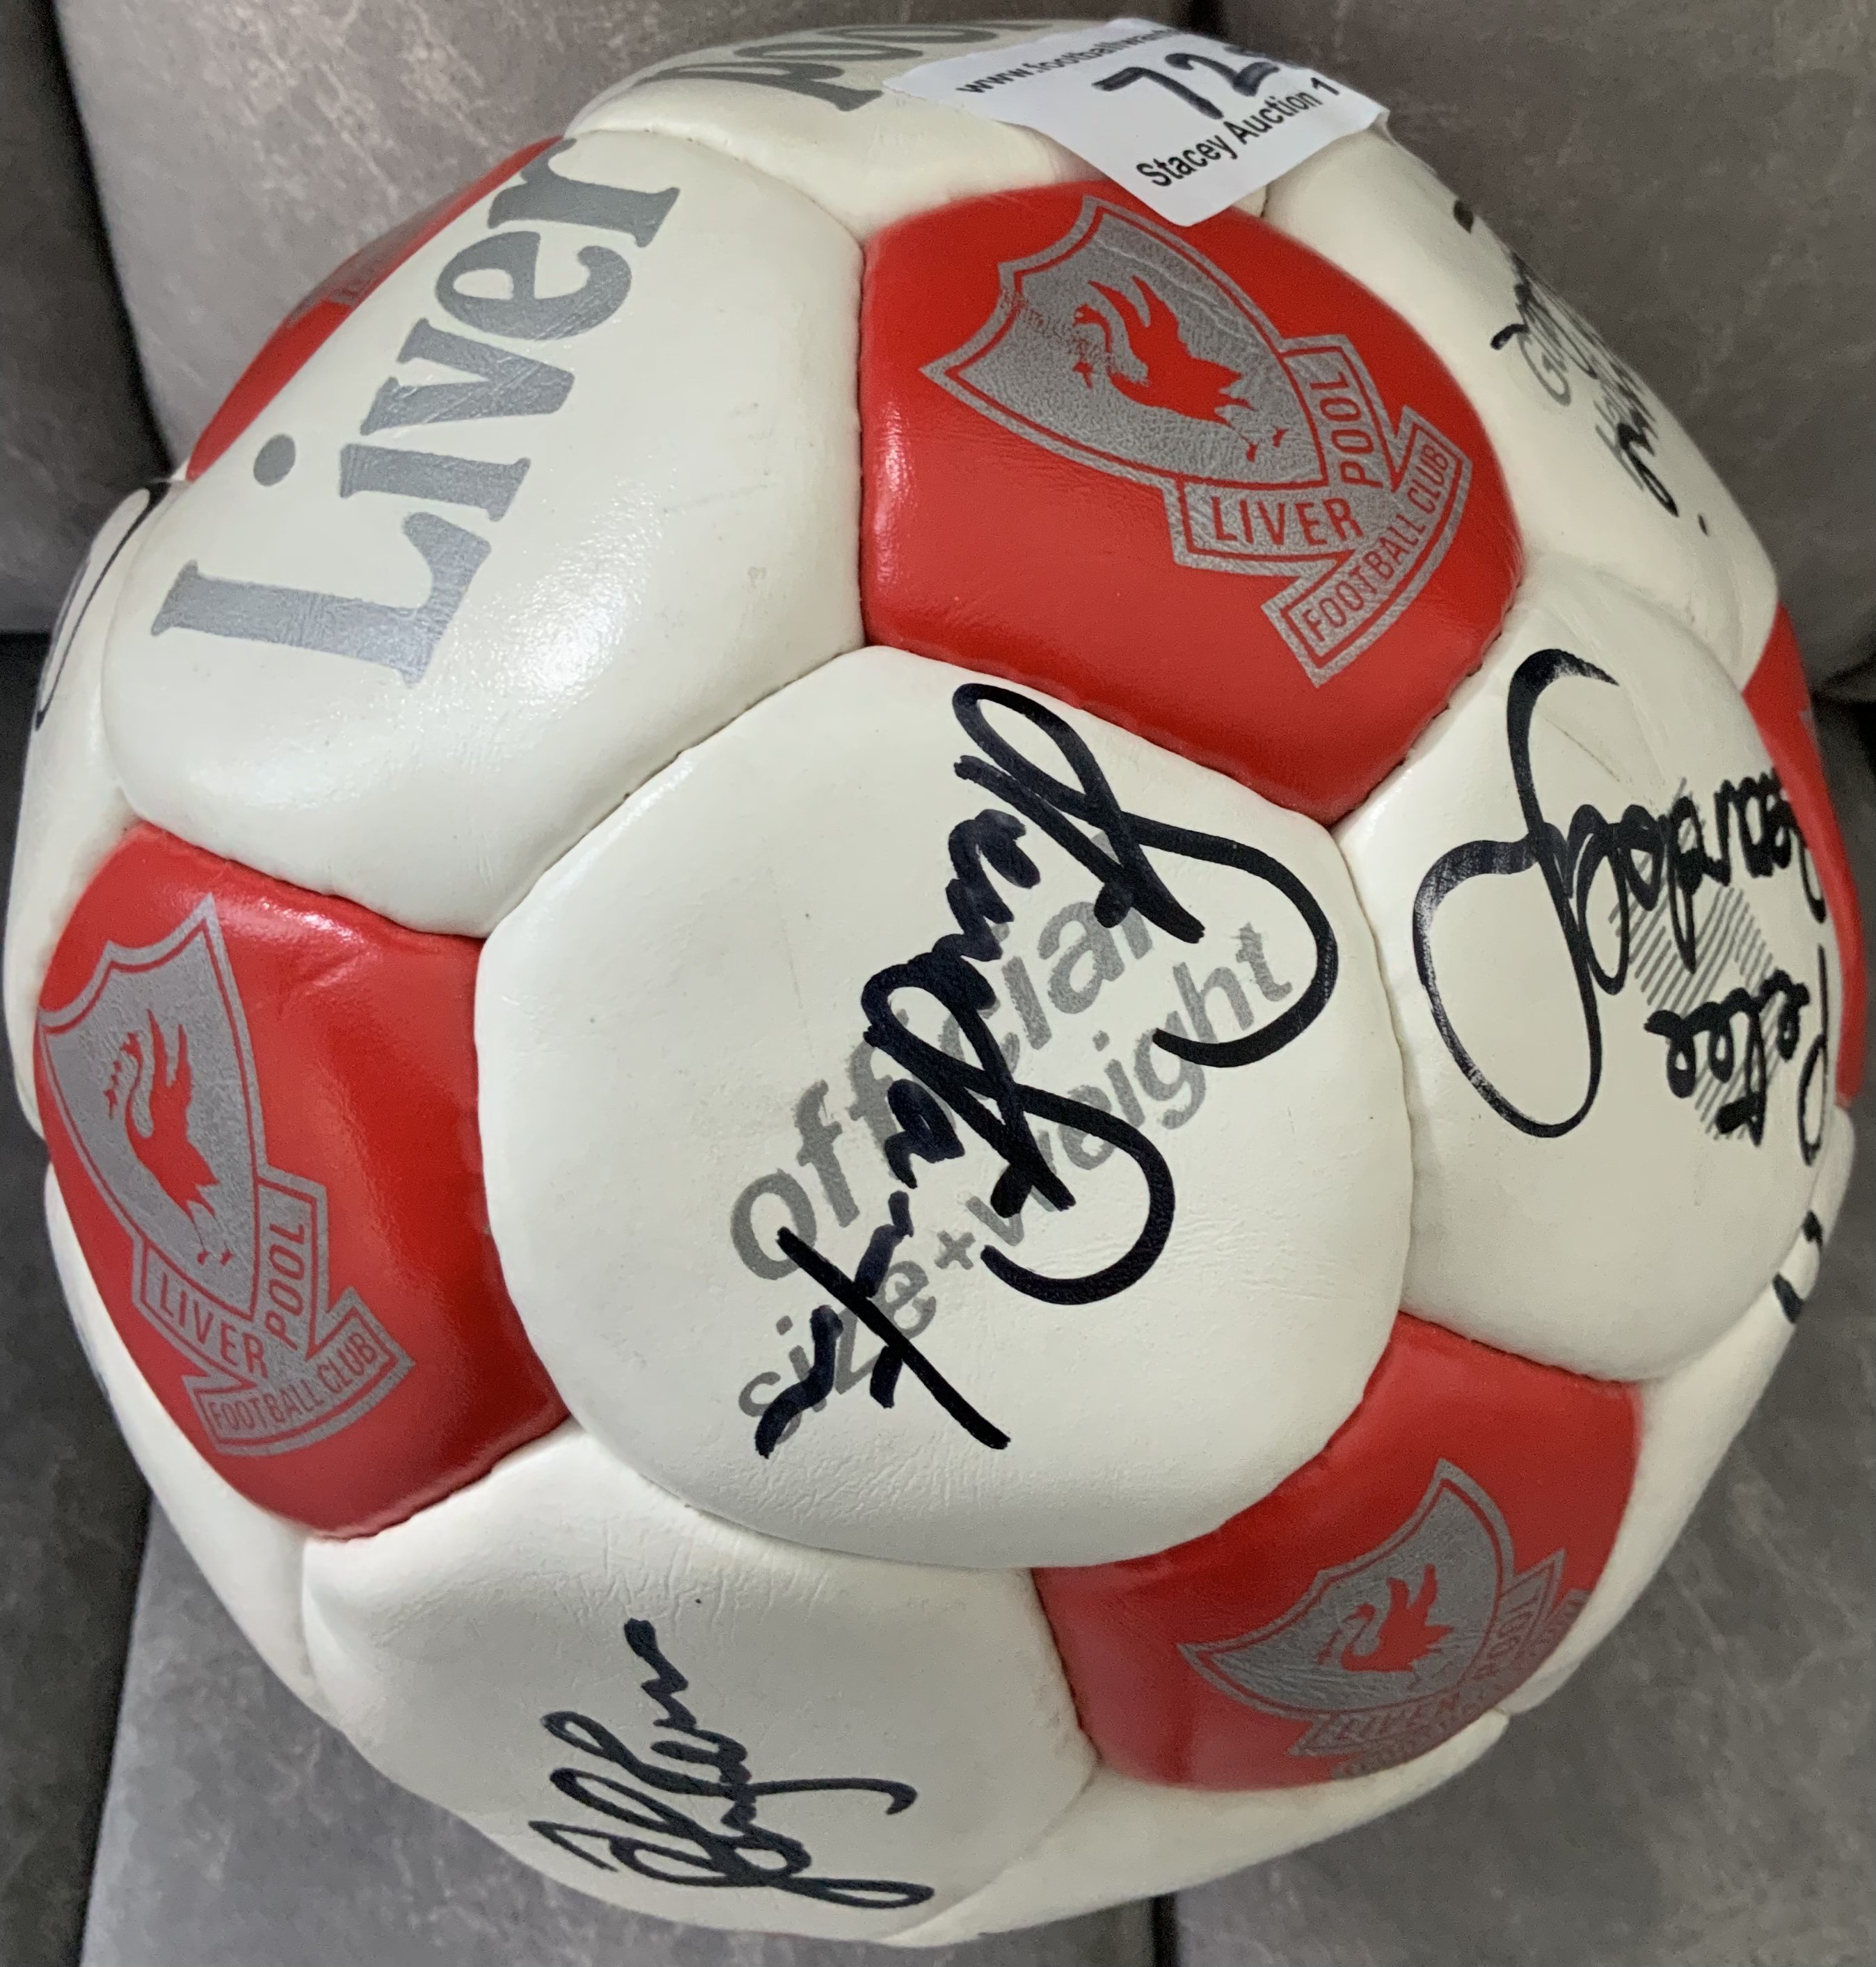 Liverpool 88/89 FA Cup Winners Signed Football: Official Liverpool ball with genuine autographs - Image 5 of 5